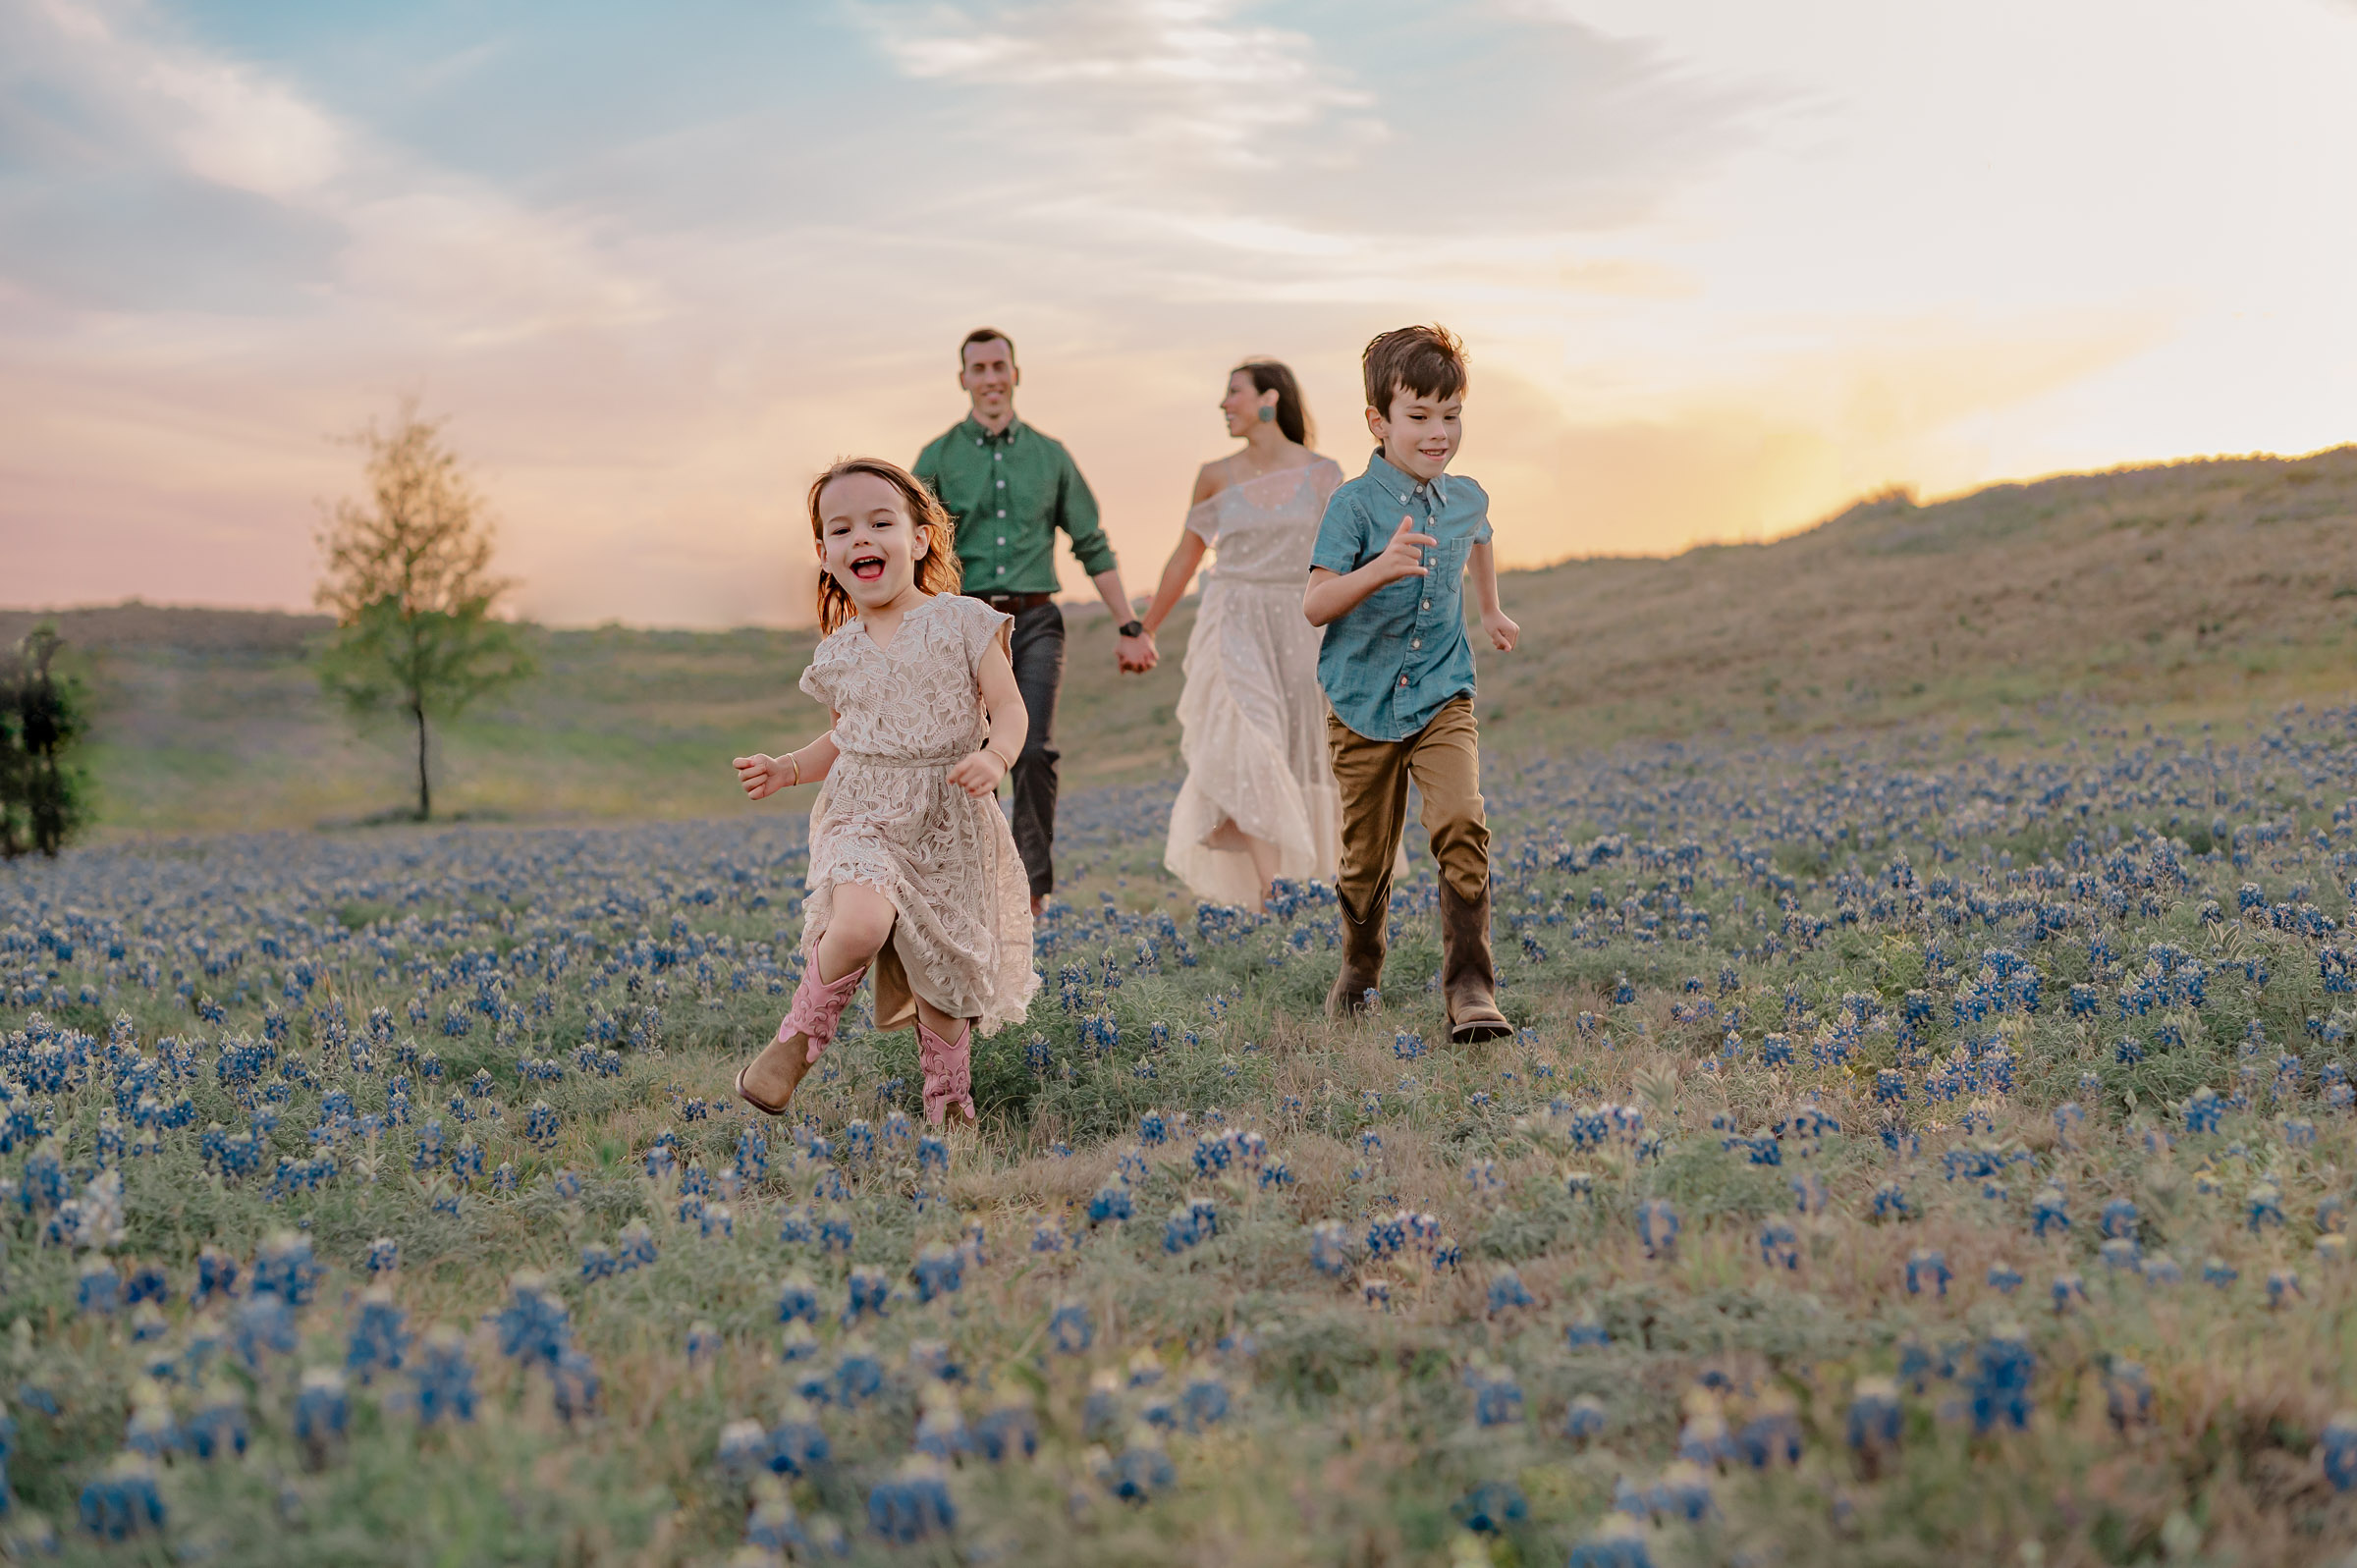 Family frolicking through a field of bluebonnets